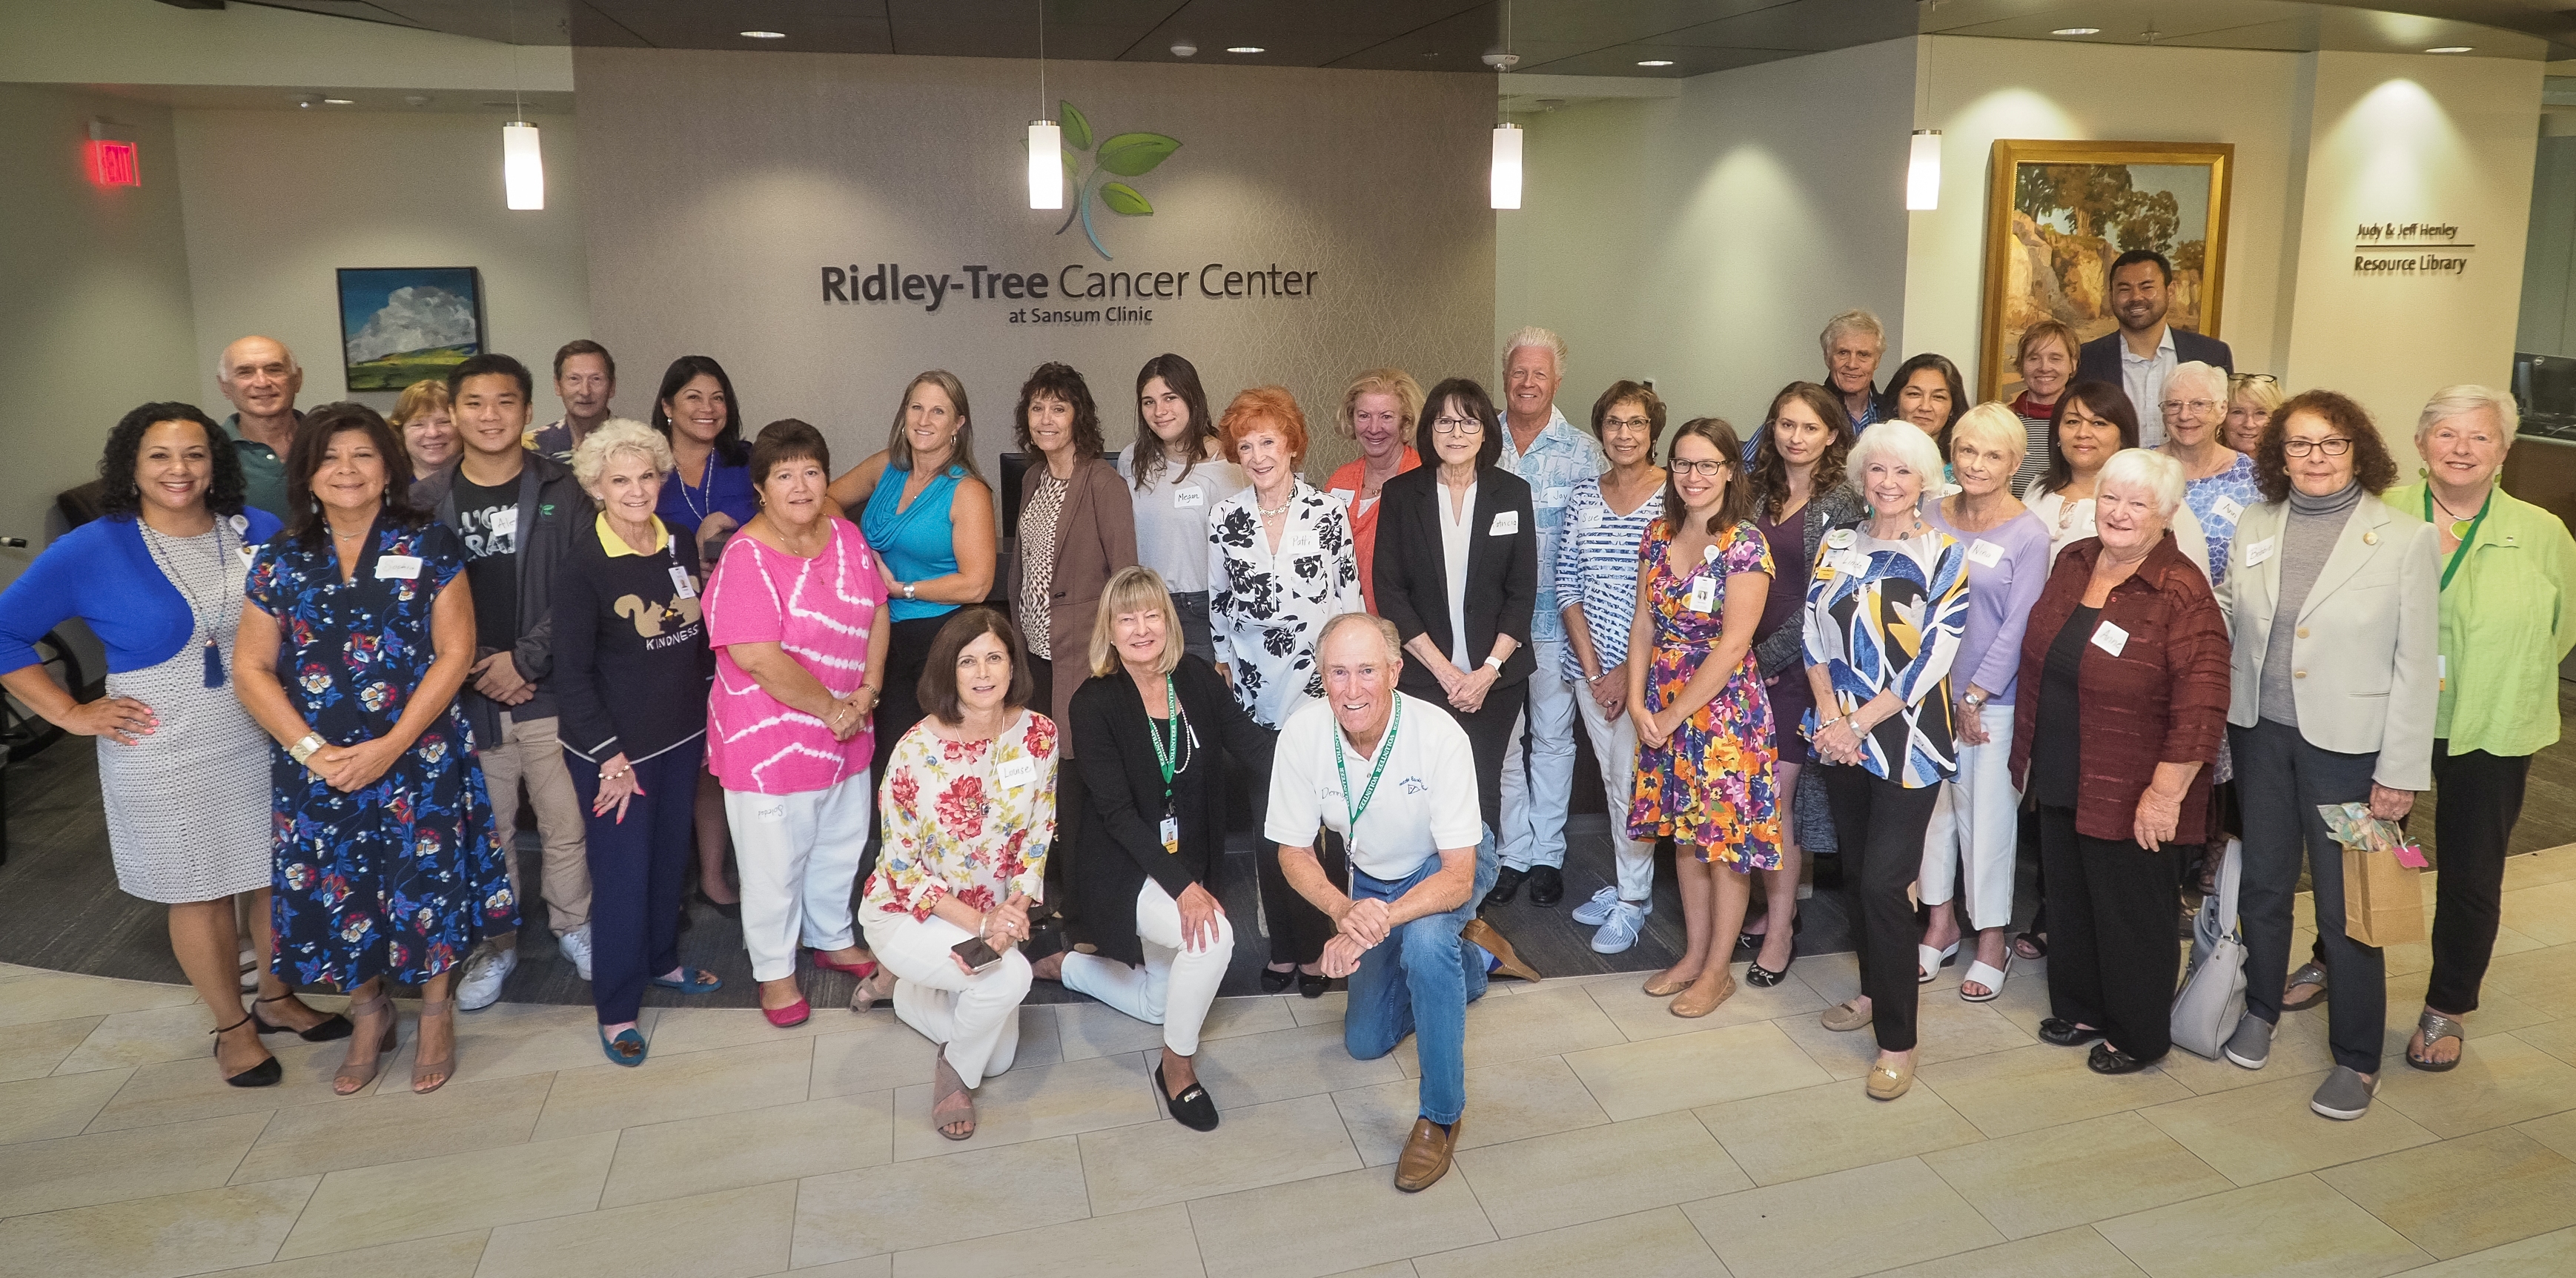 Volunteers for Ridley-Tree Cancer Center